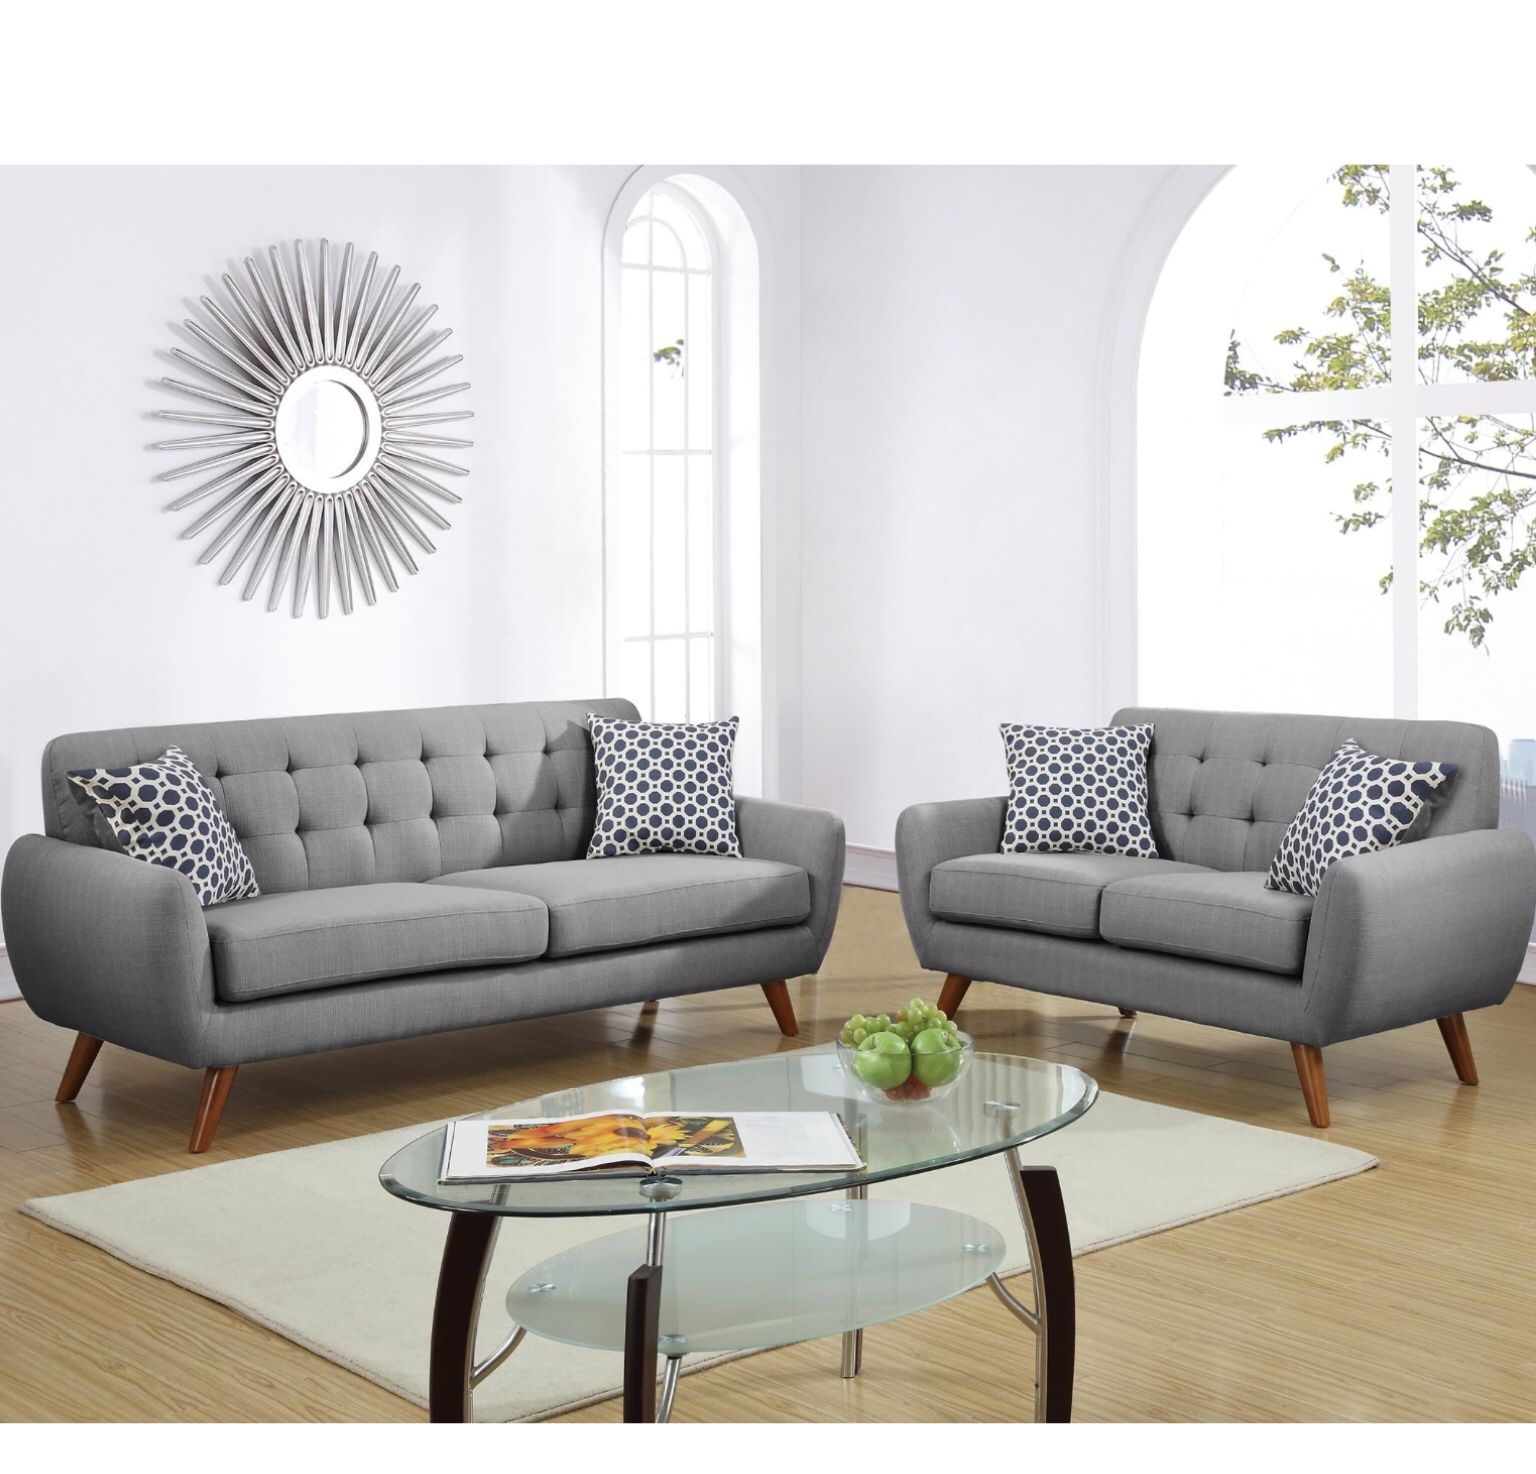 Sofa & Loveseat With Pillows On Sale $699.99